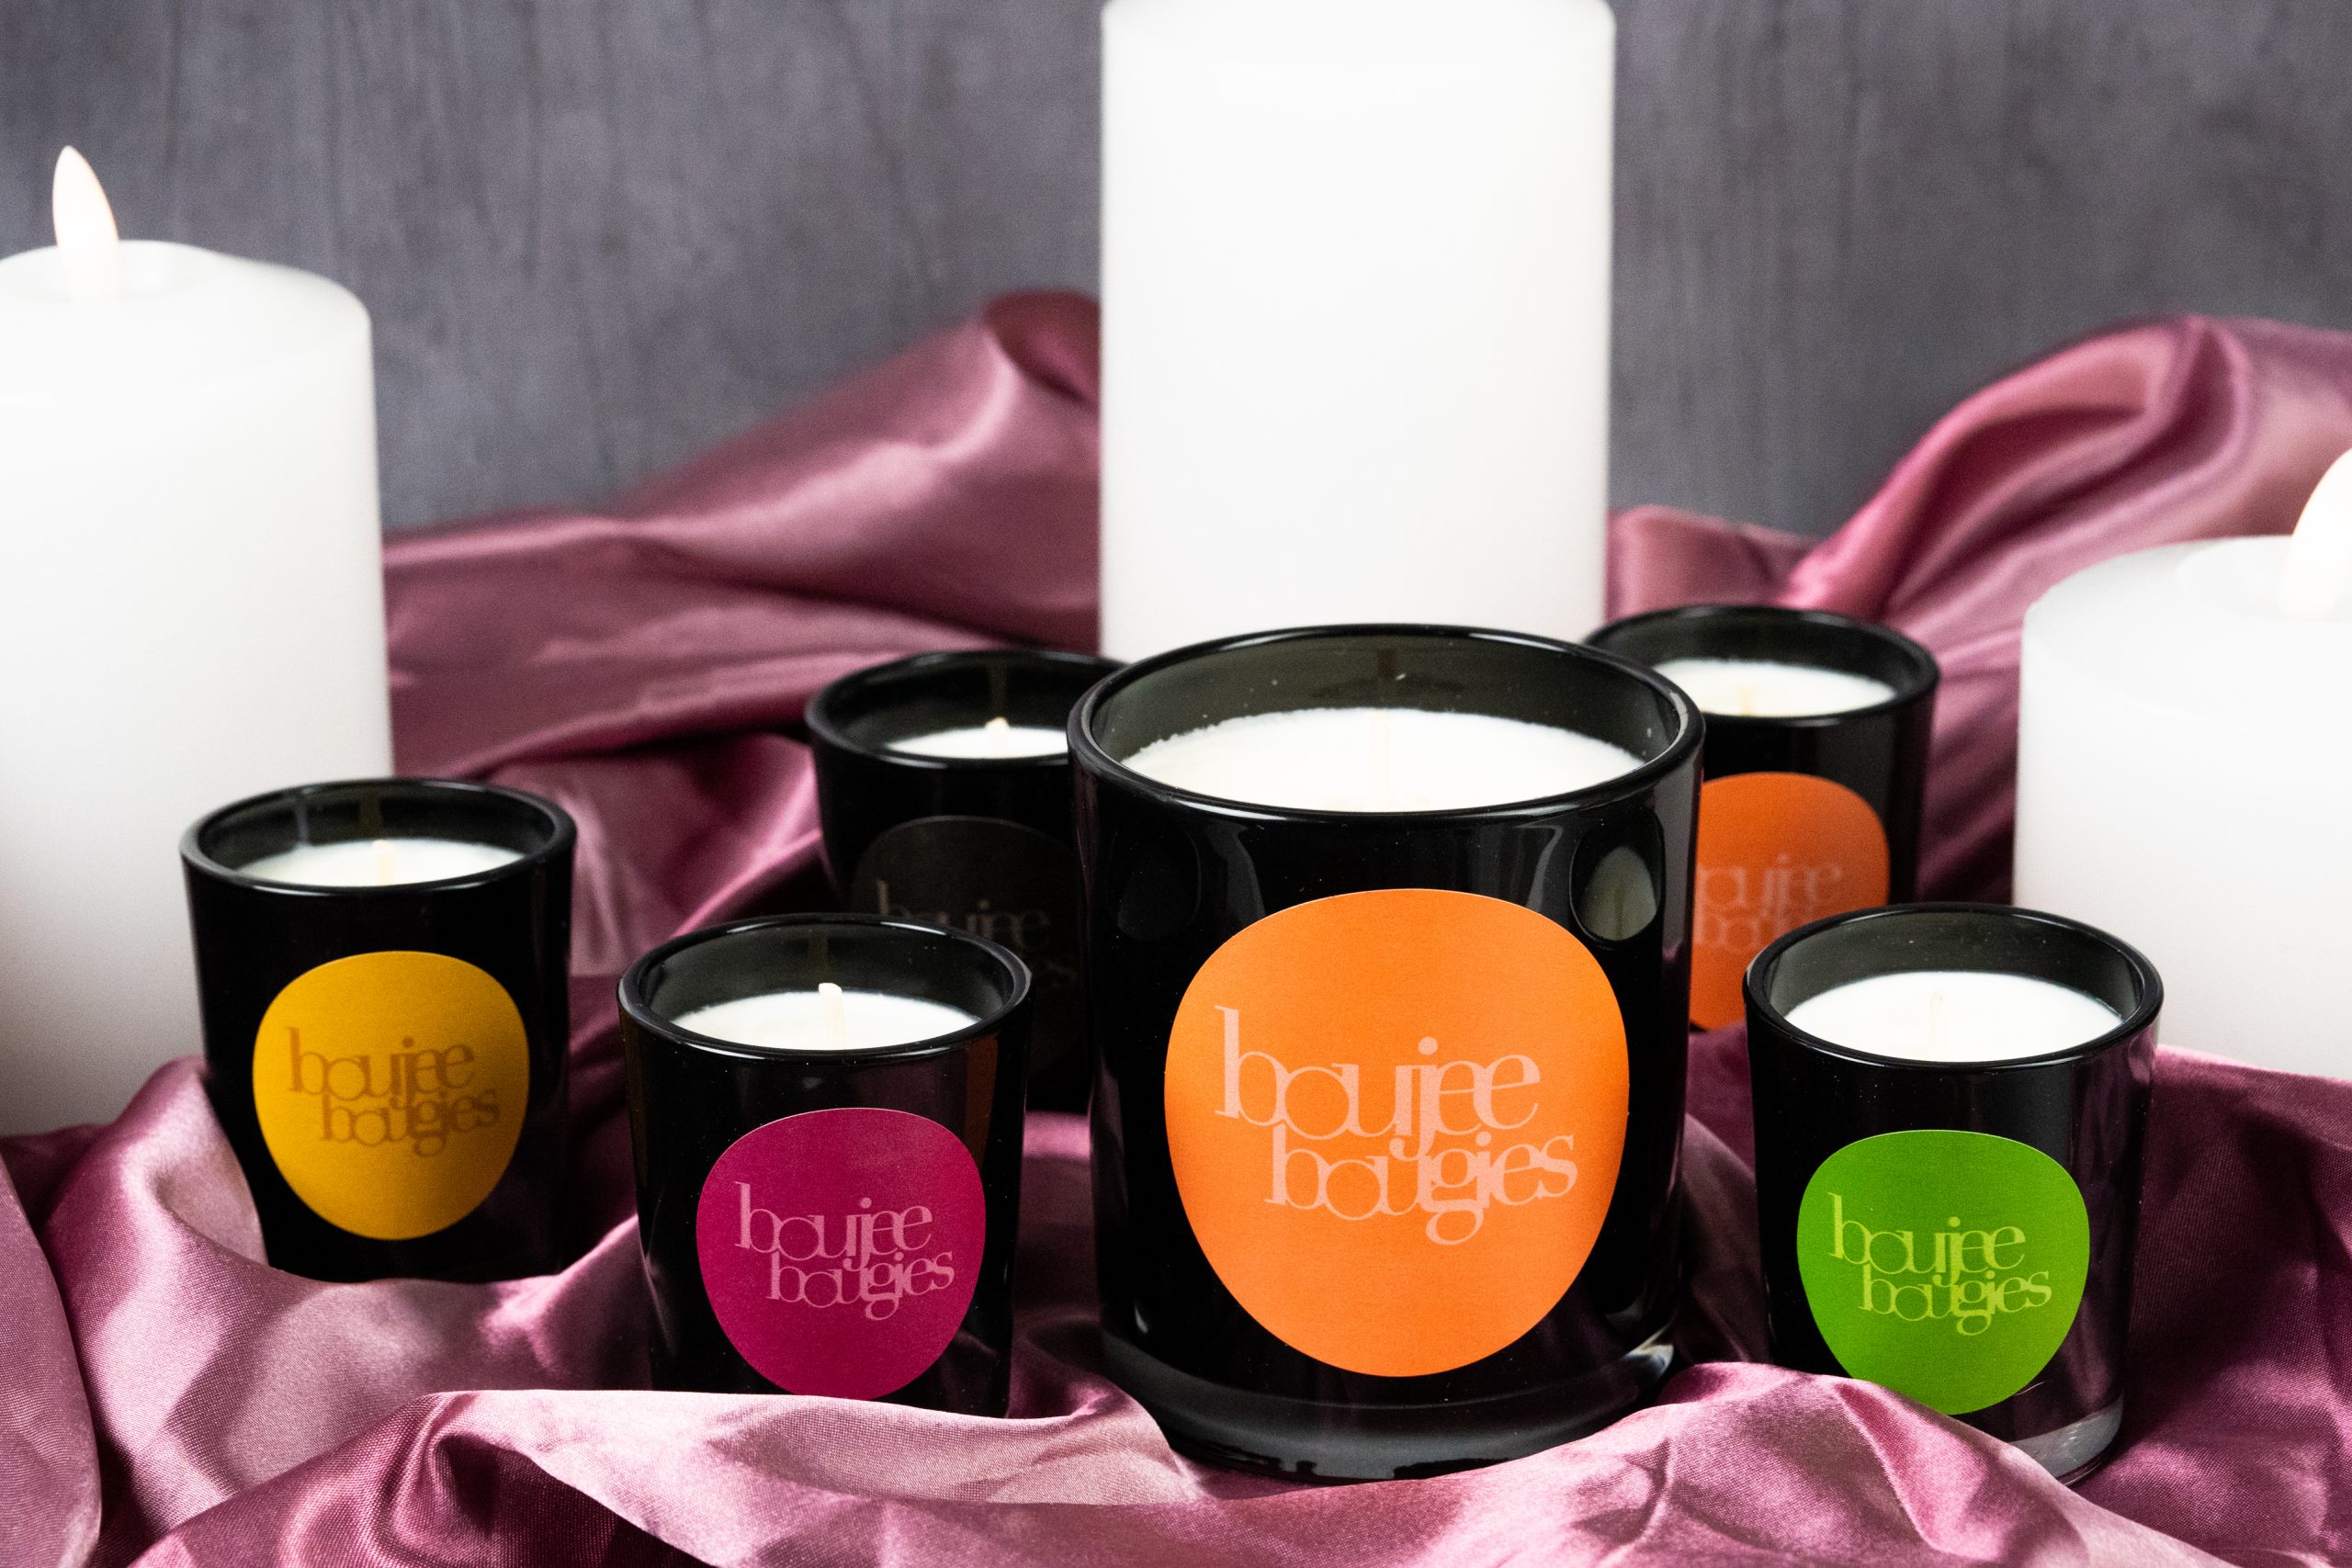 Boujee Bougies Candles